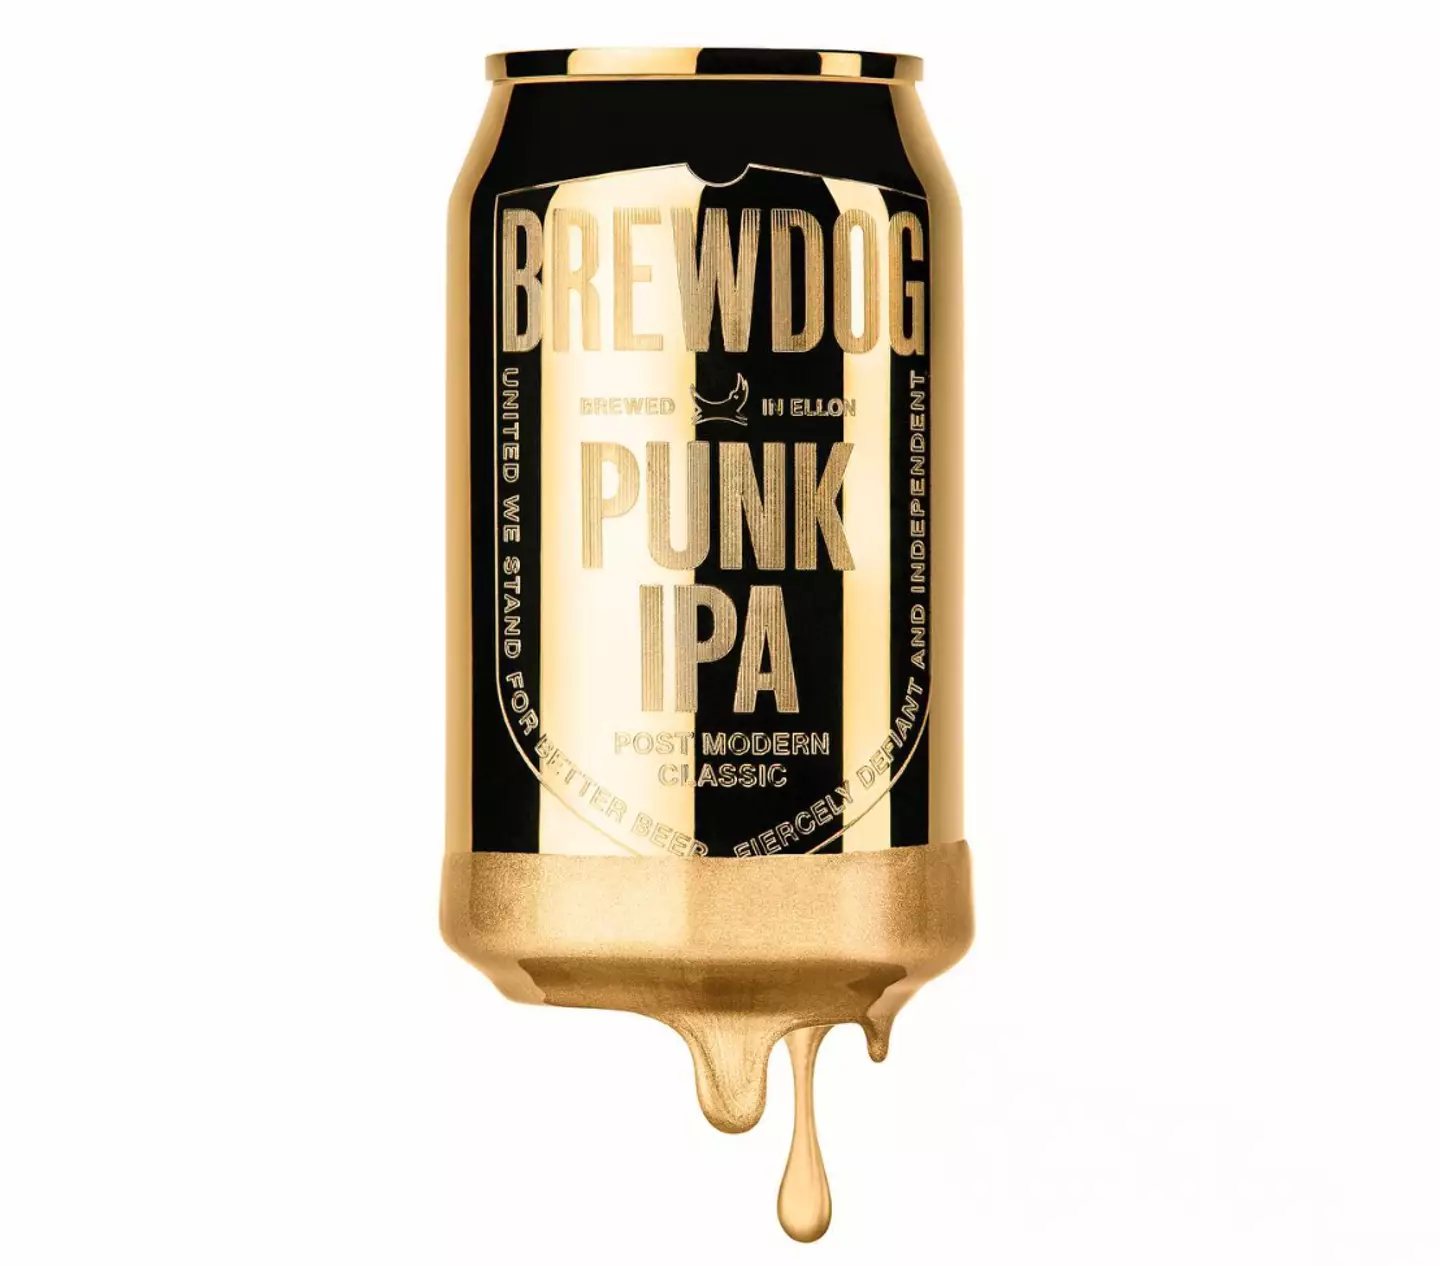 The cans were described as 'solid gold'.